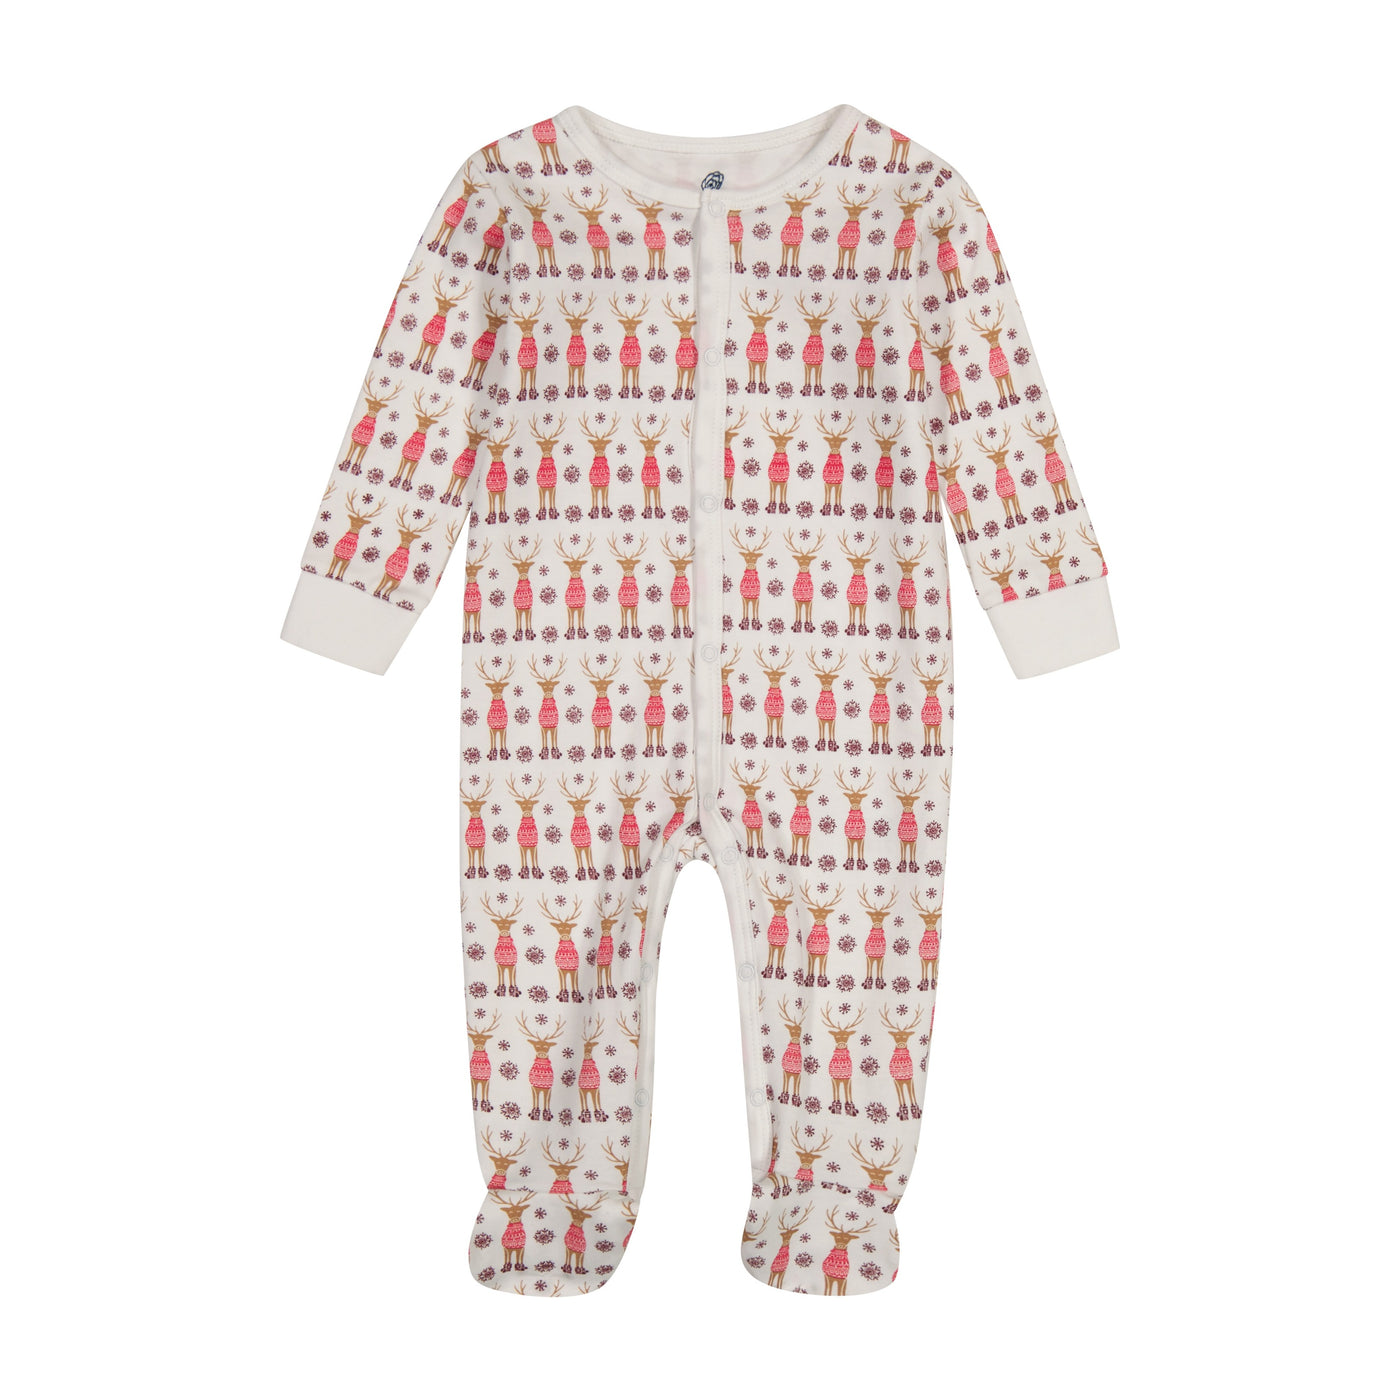 CASEY INFANT PAJAMA SUIT OH DEER HOLLY